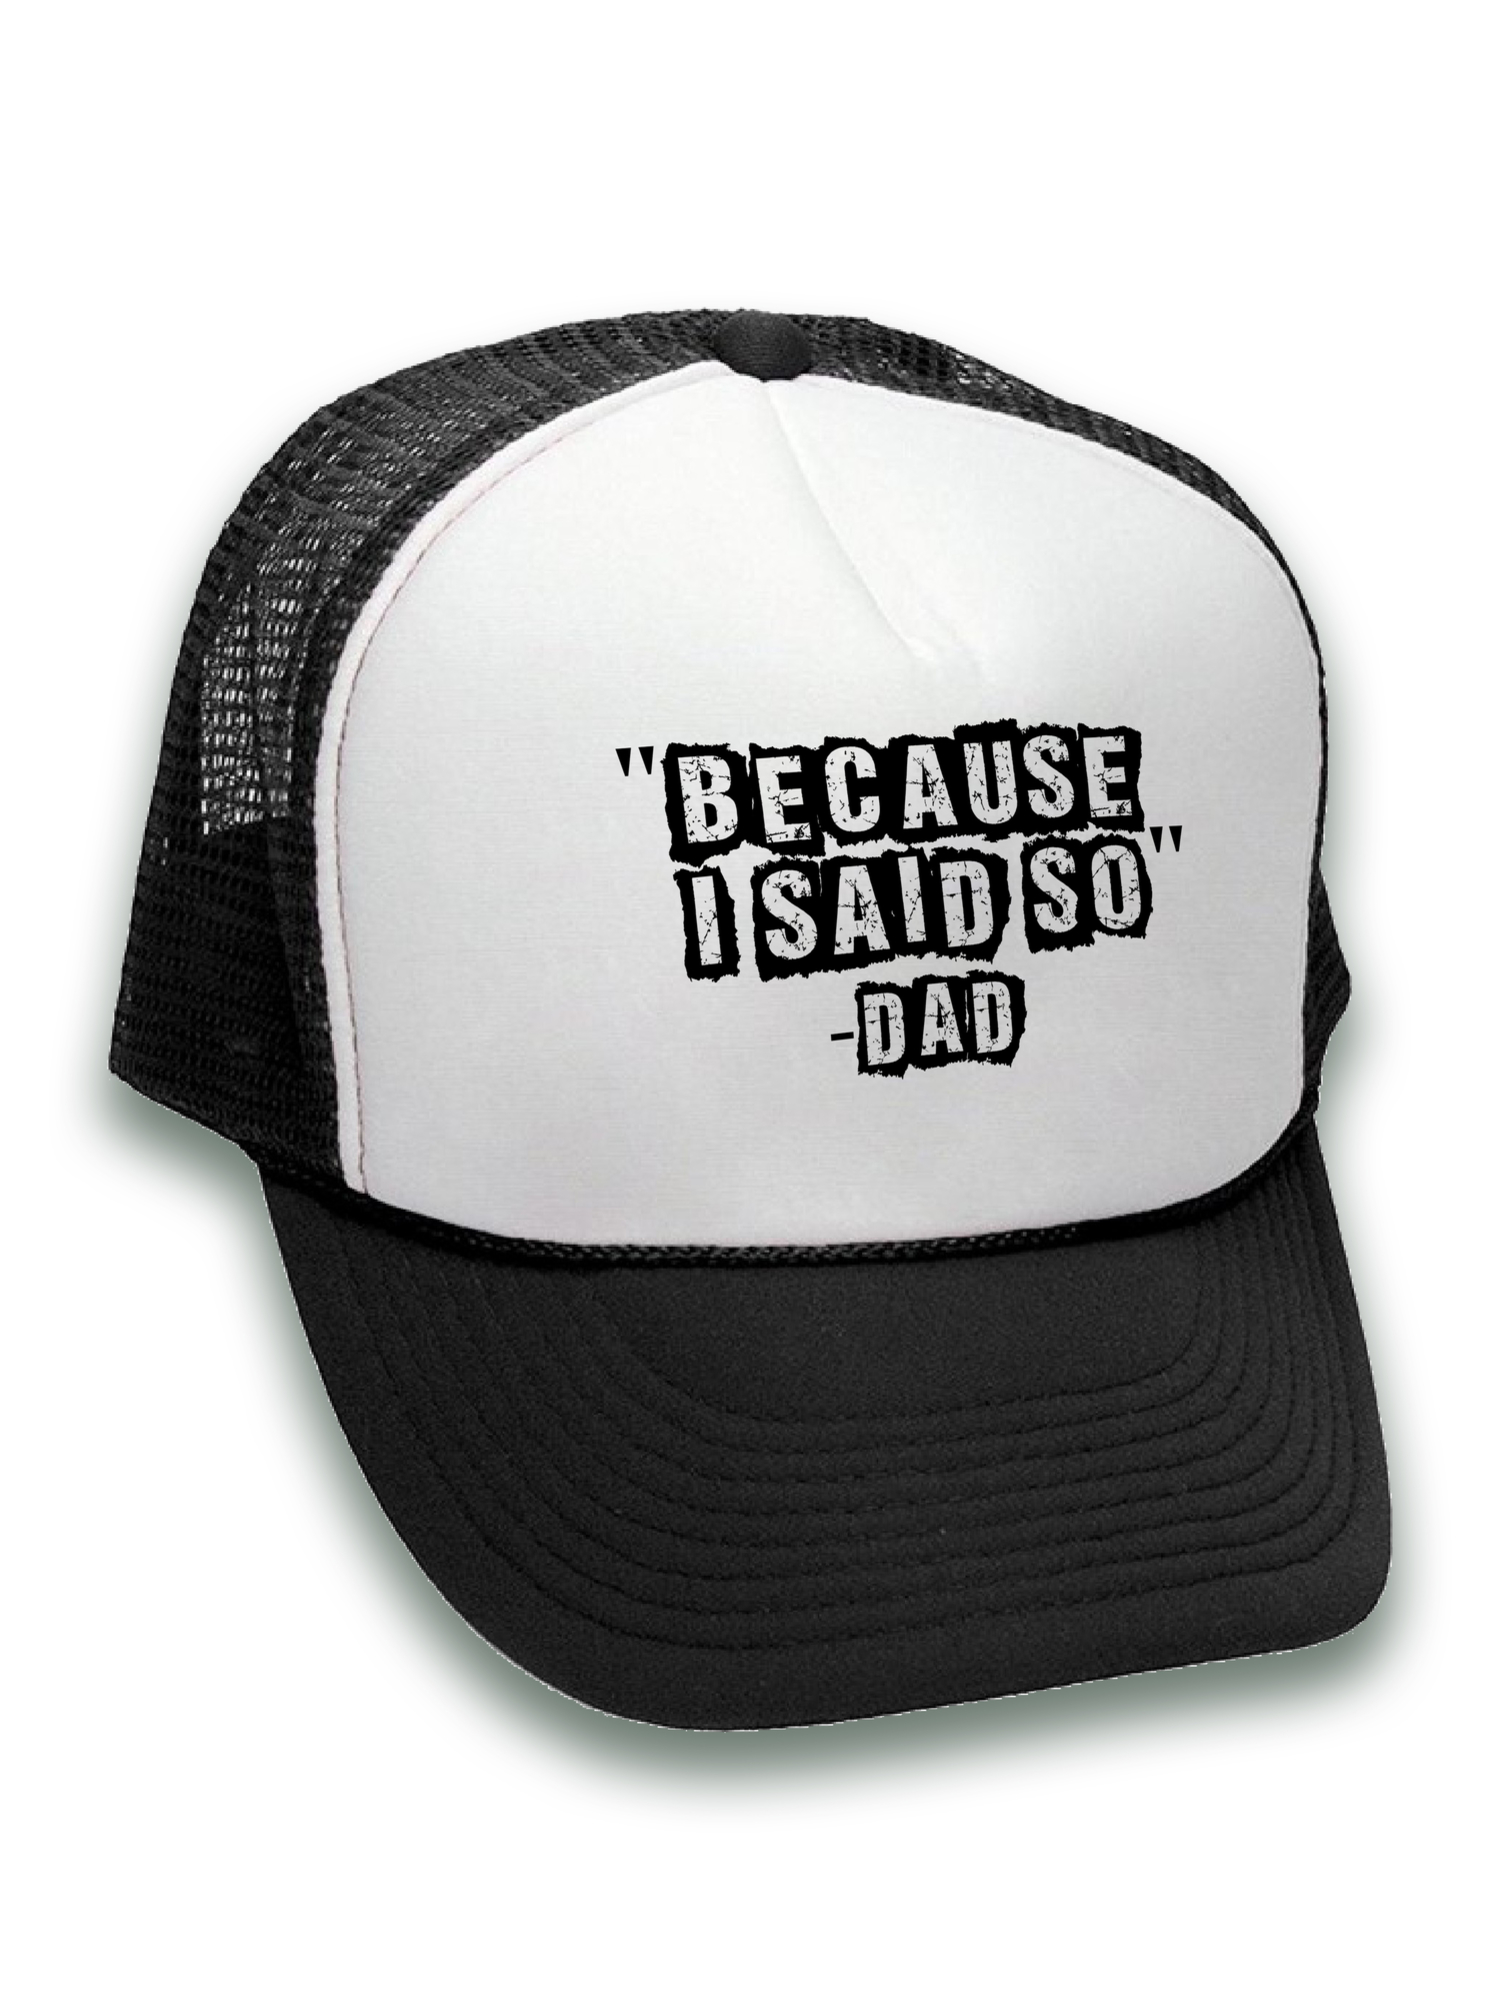 Awkward Styles Gifts for Dad Because I Said So Dad Hat Boss Dad Trucker Hat Legendary Dad Hat Funny Gifts for Father's Day Hat Accessories for Dad Father Trucker Hat Father's Day 2018 Father Son - image 2 of 6